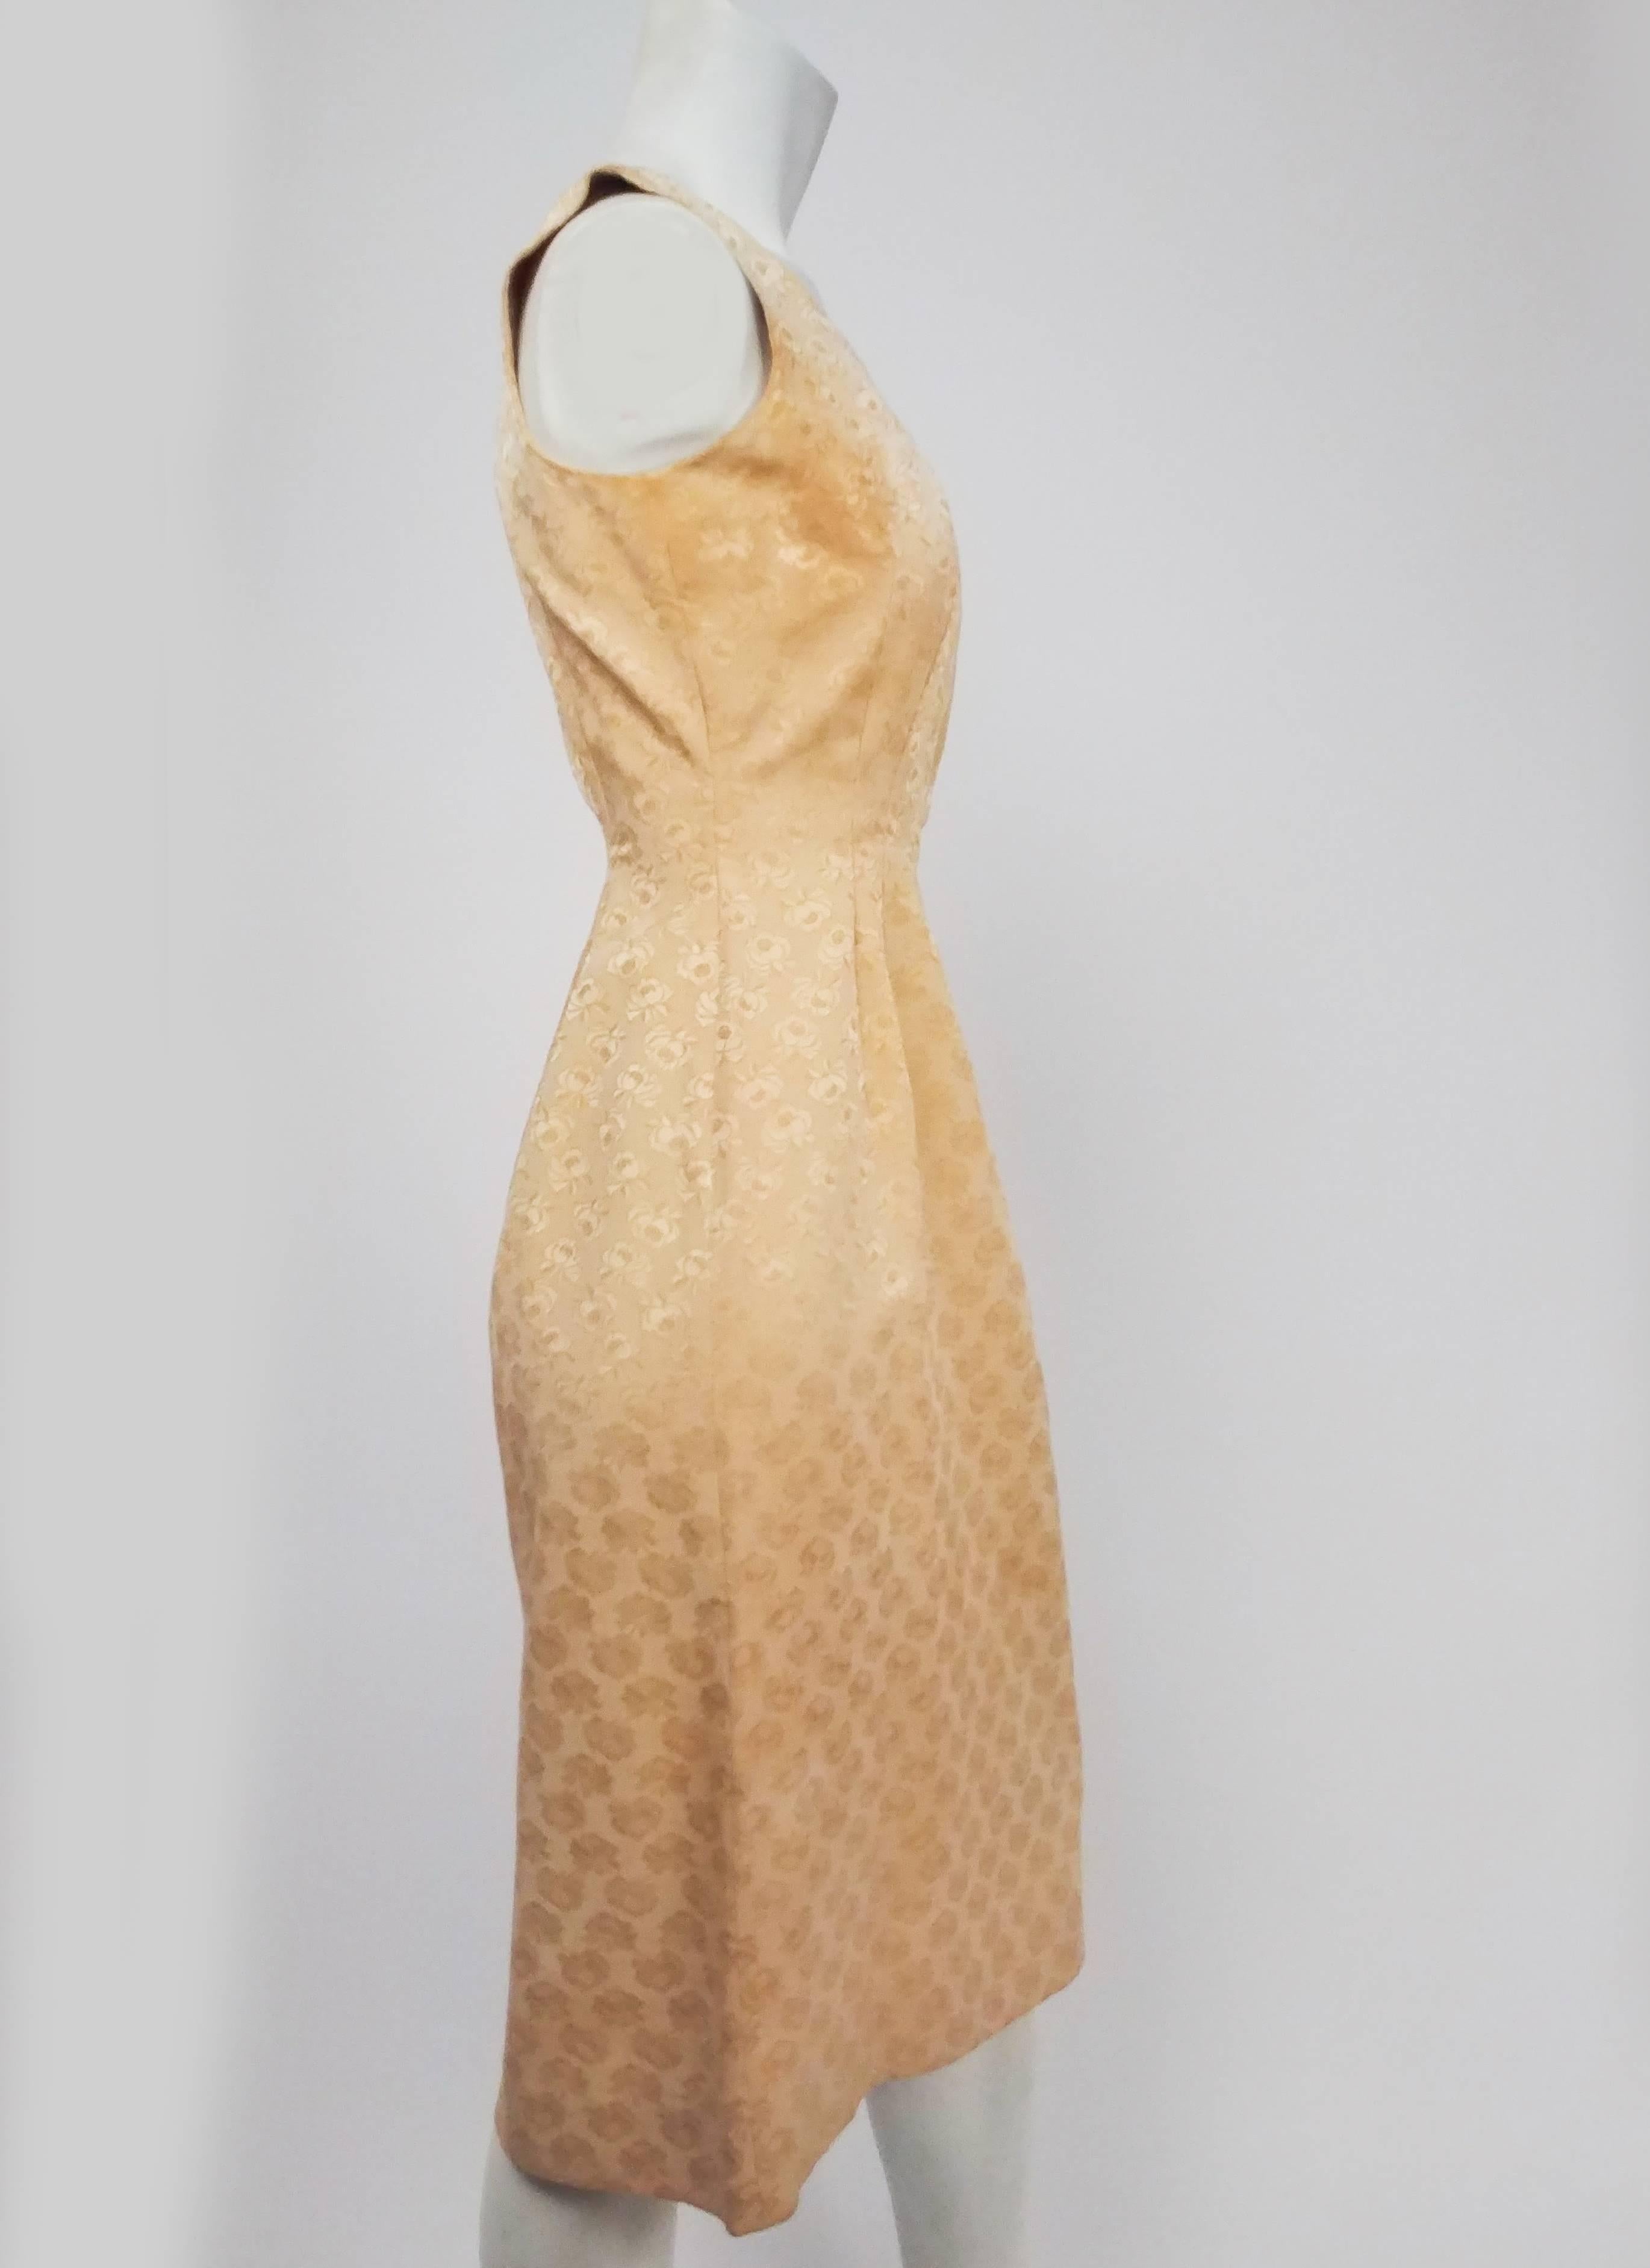 Lilli Ann Yellow Rose Jacquard Cocktail Dress, 1960s. Textured yellow jacquard with rose pattern shift dress. Zips up back.